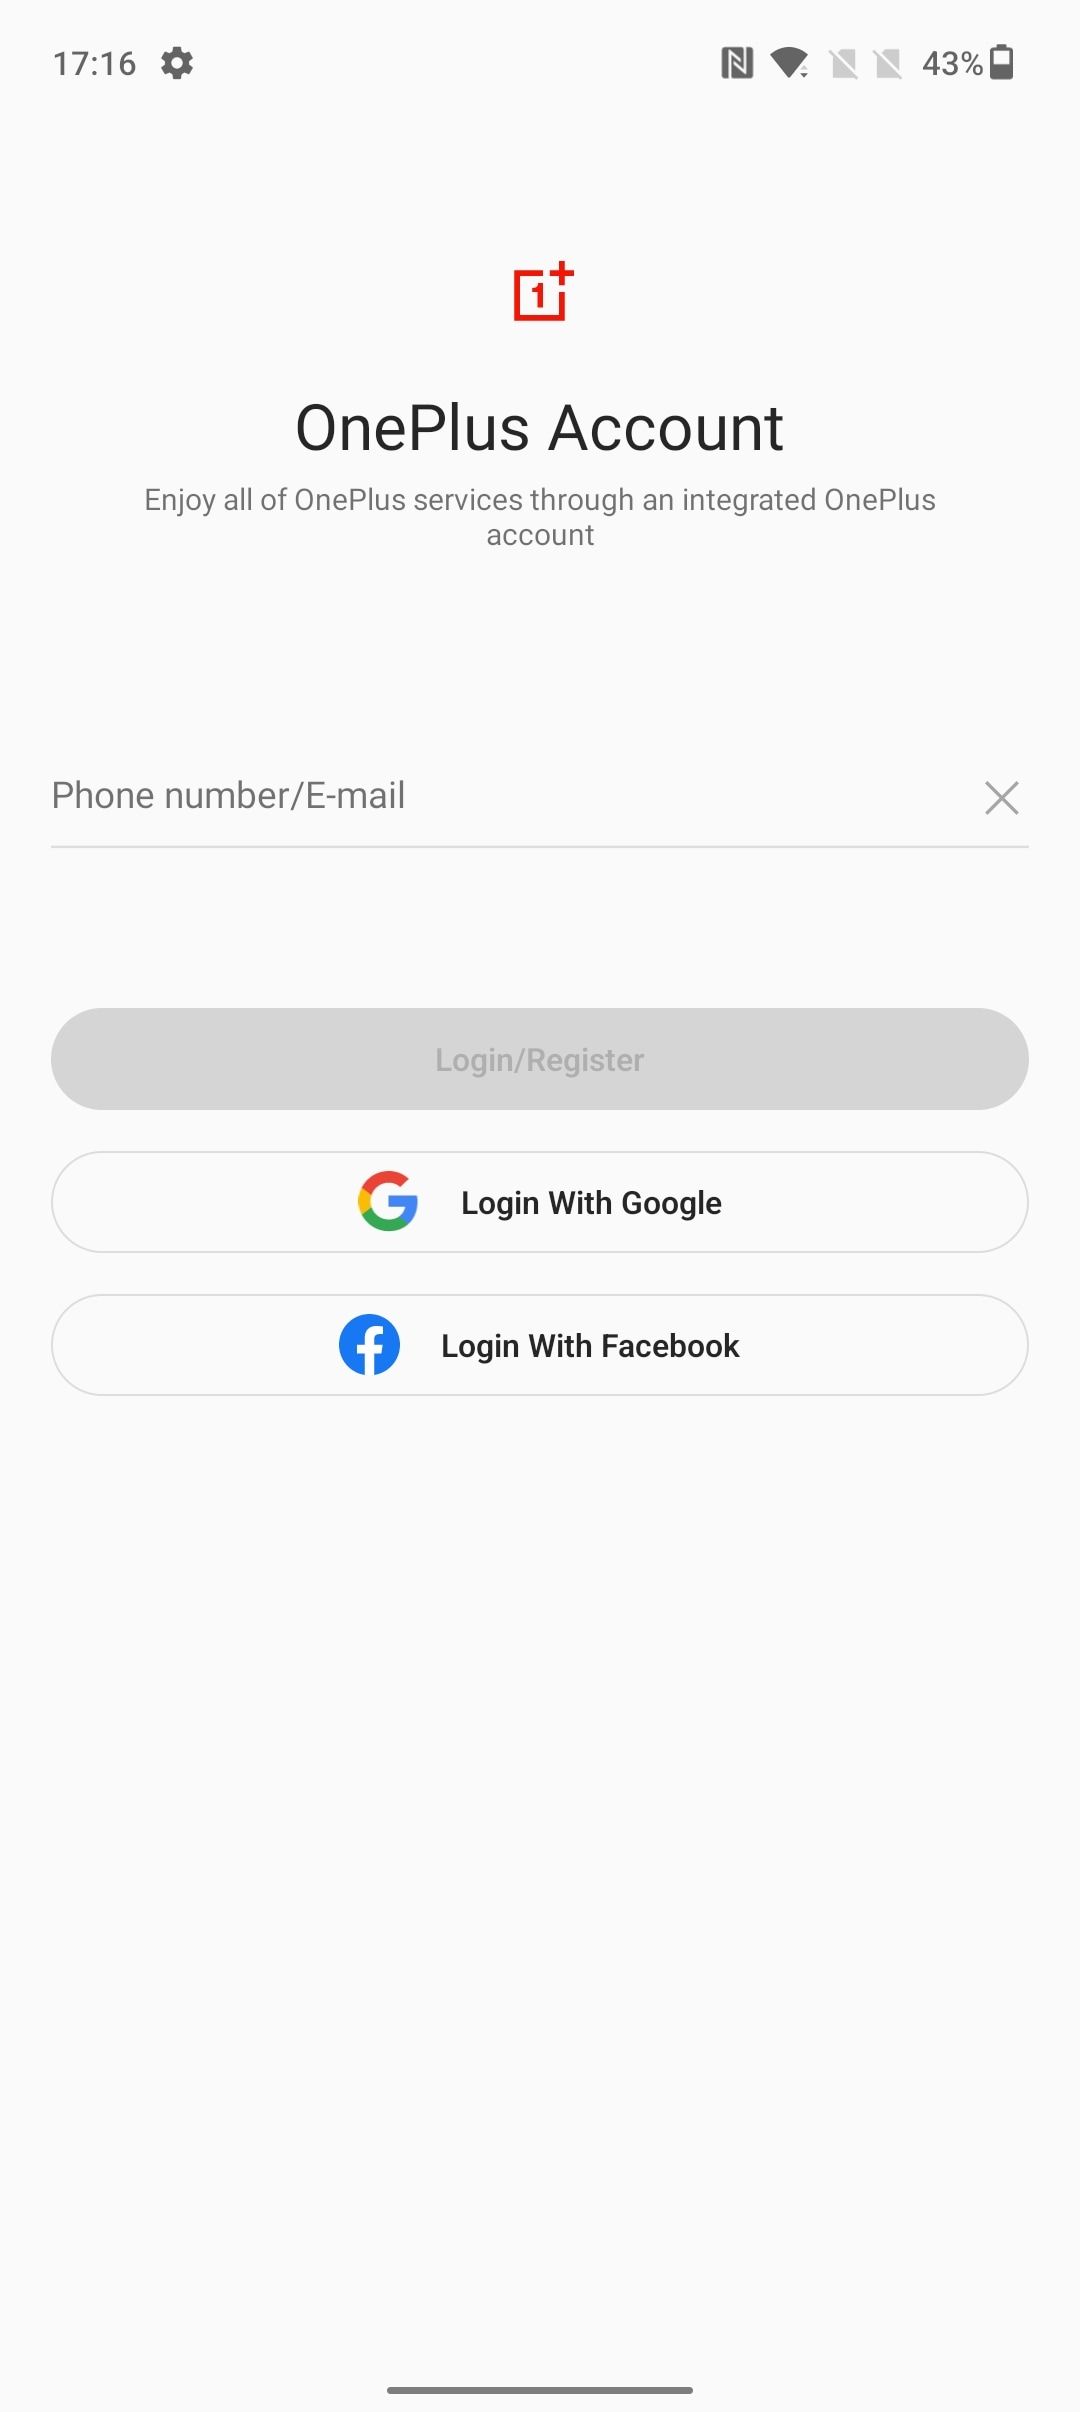 log in with oneplus account